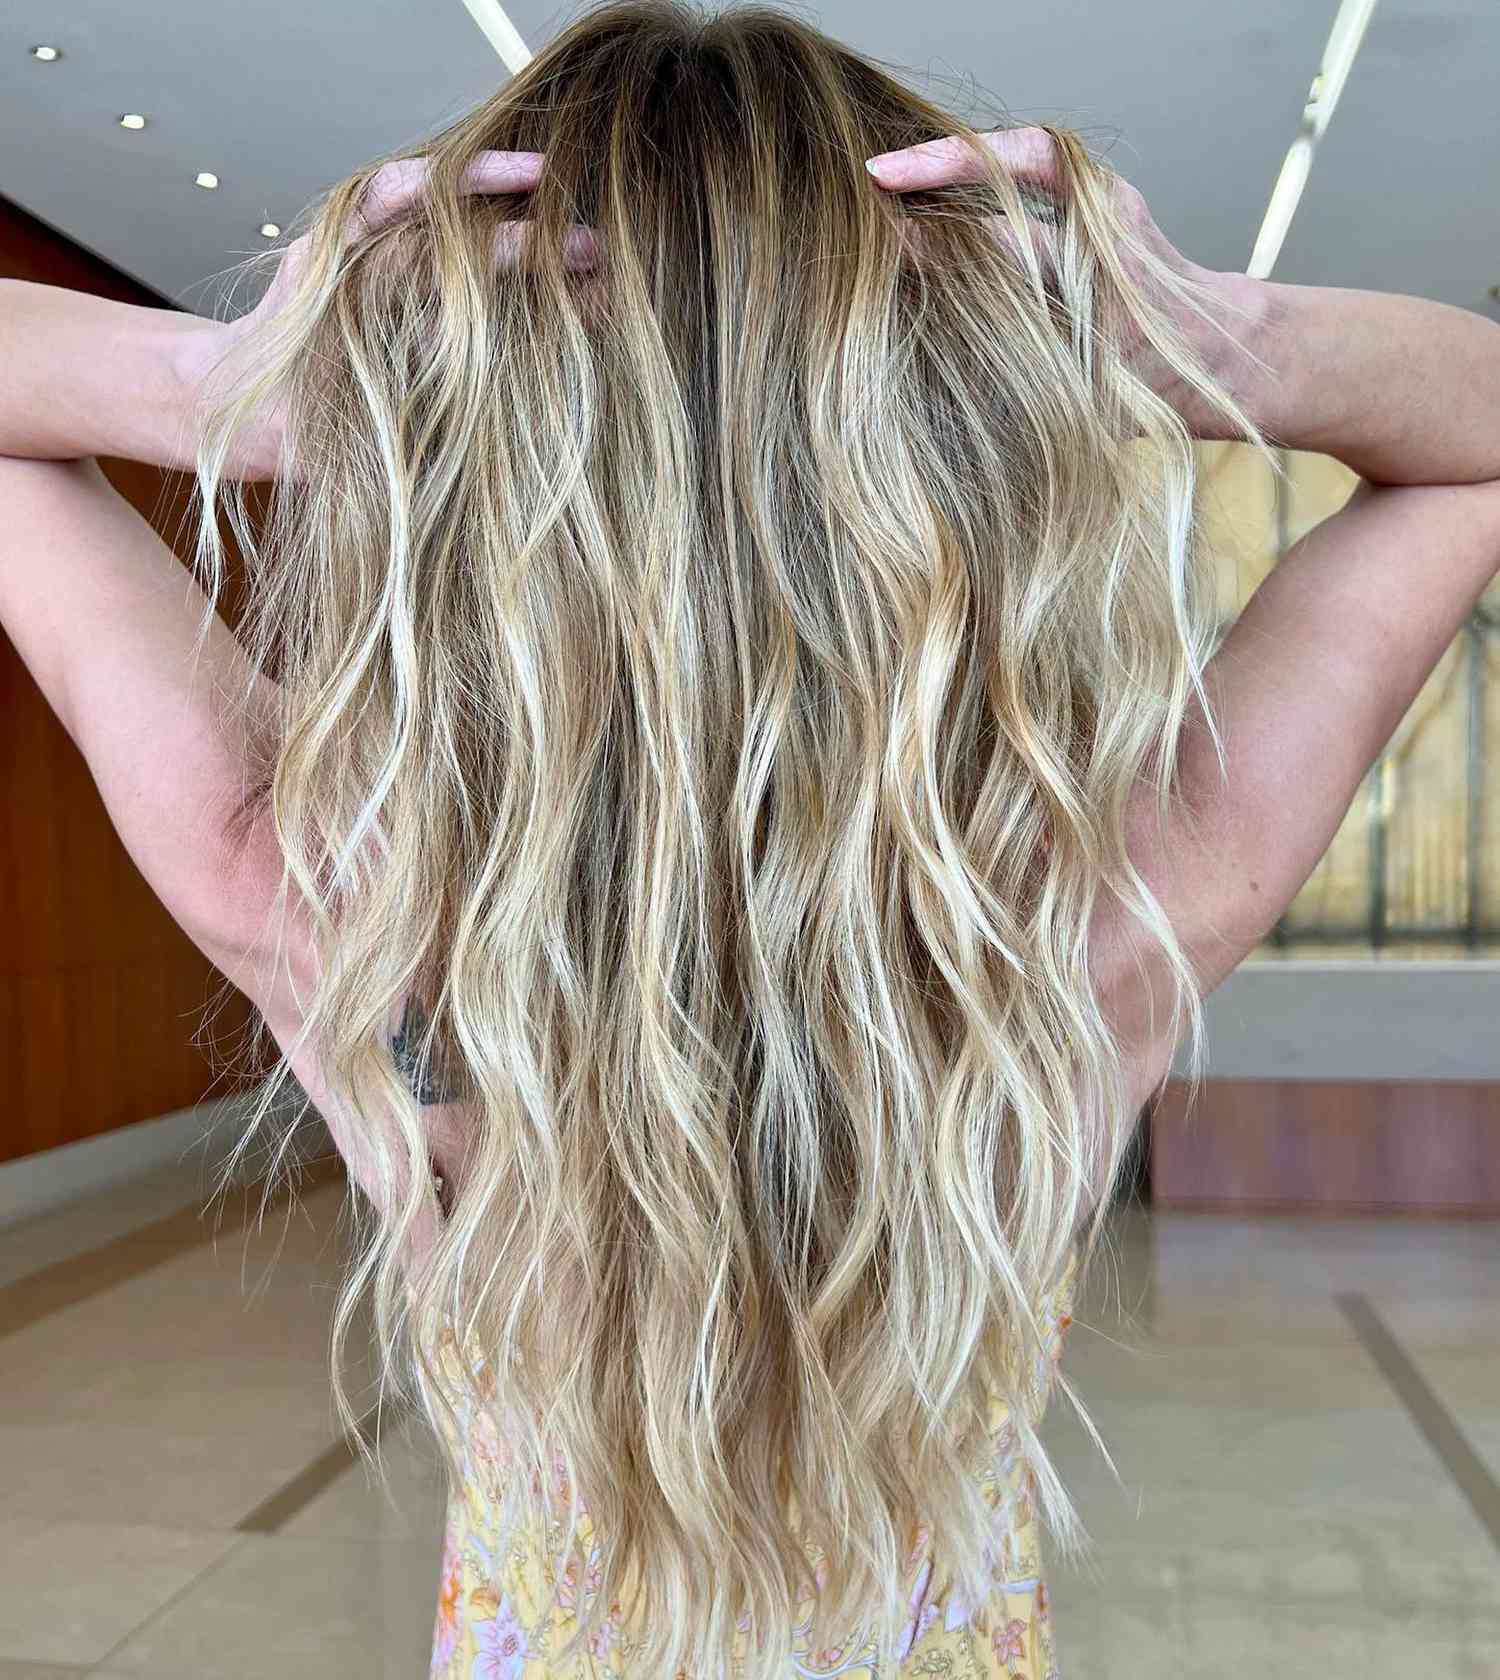 Rear view of wavy blonde hair with teasylights